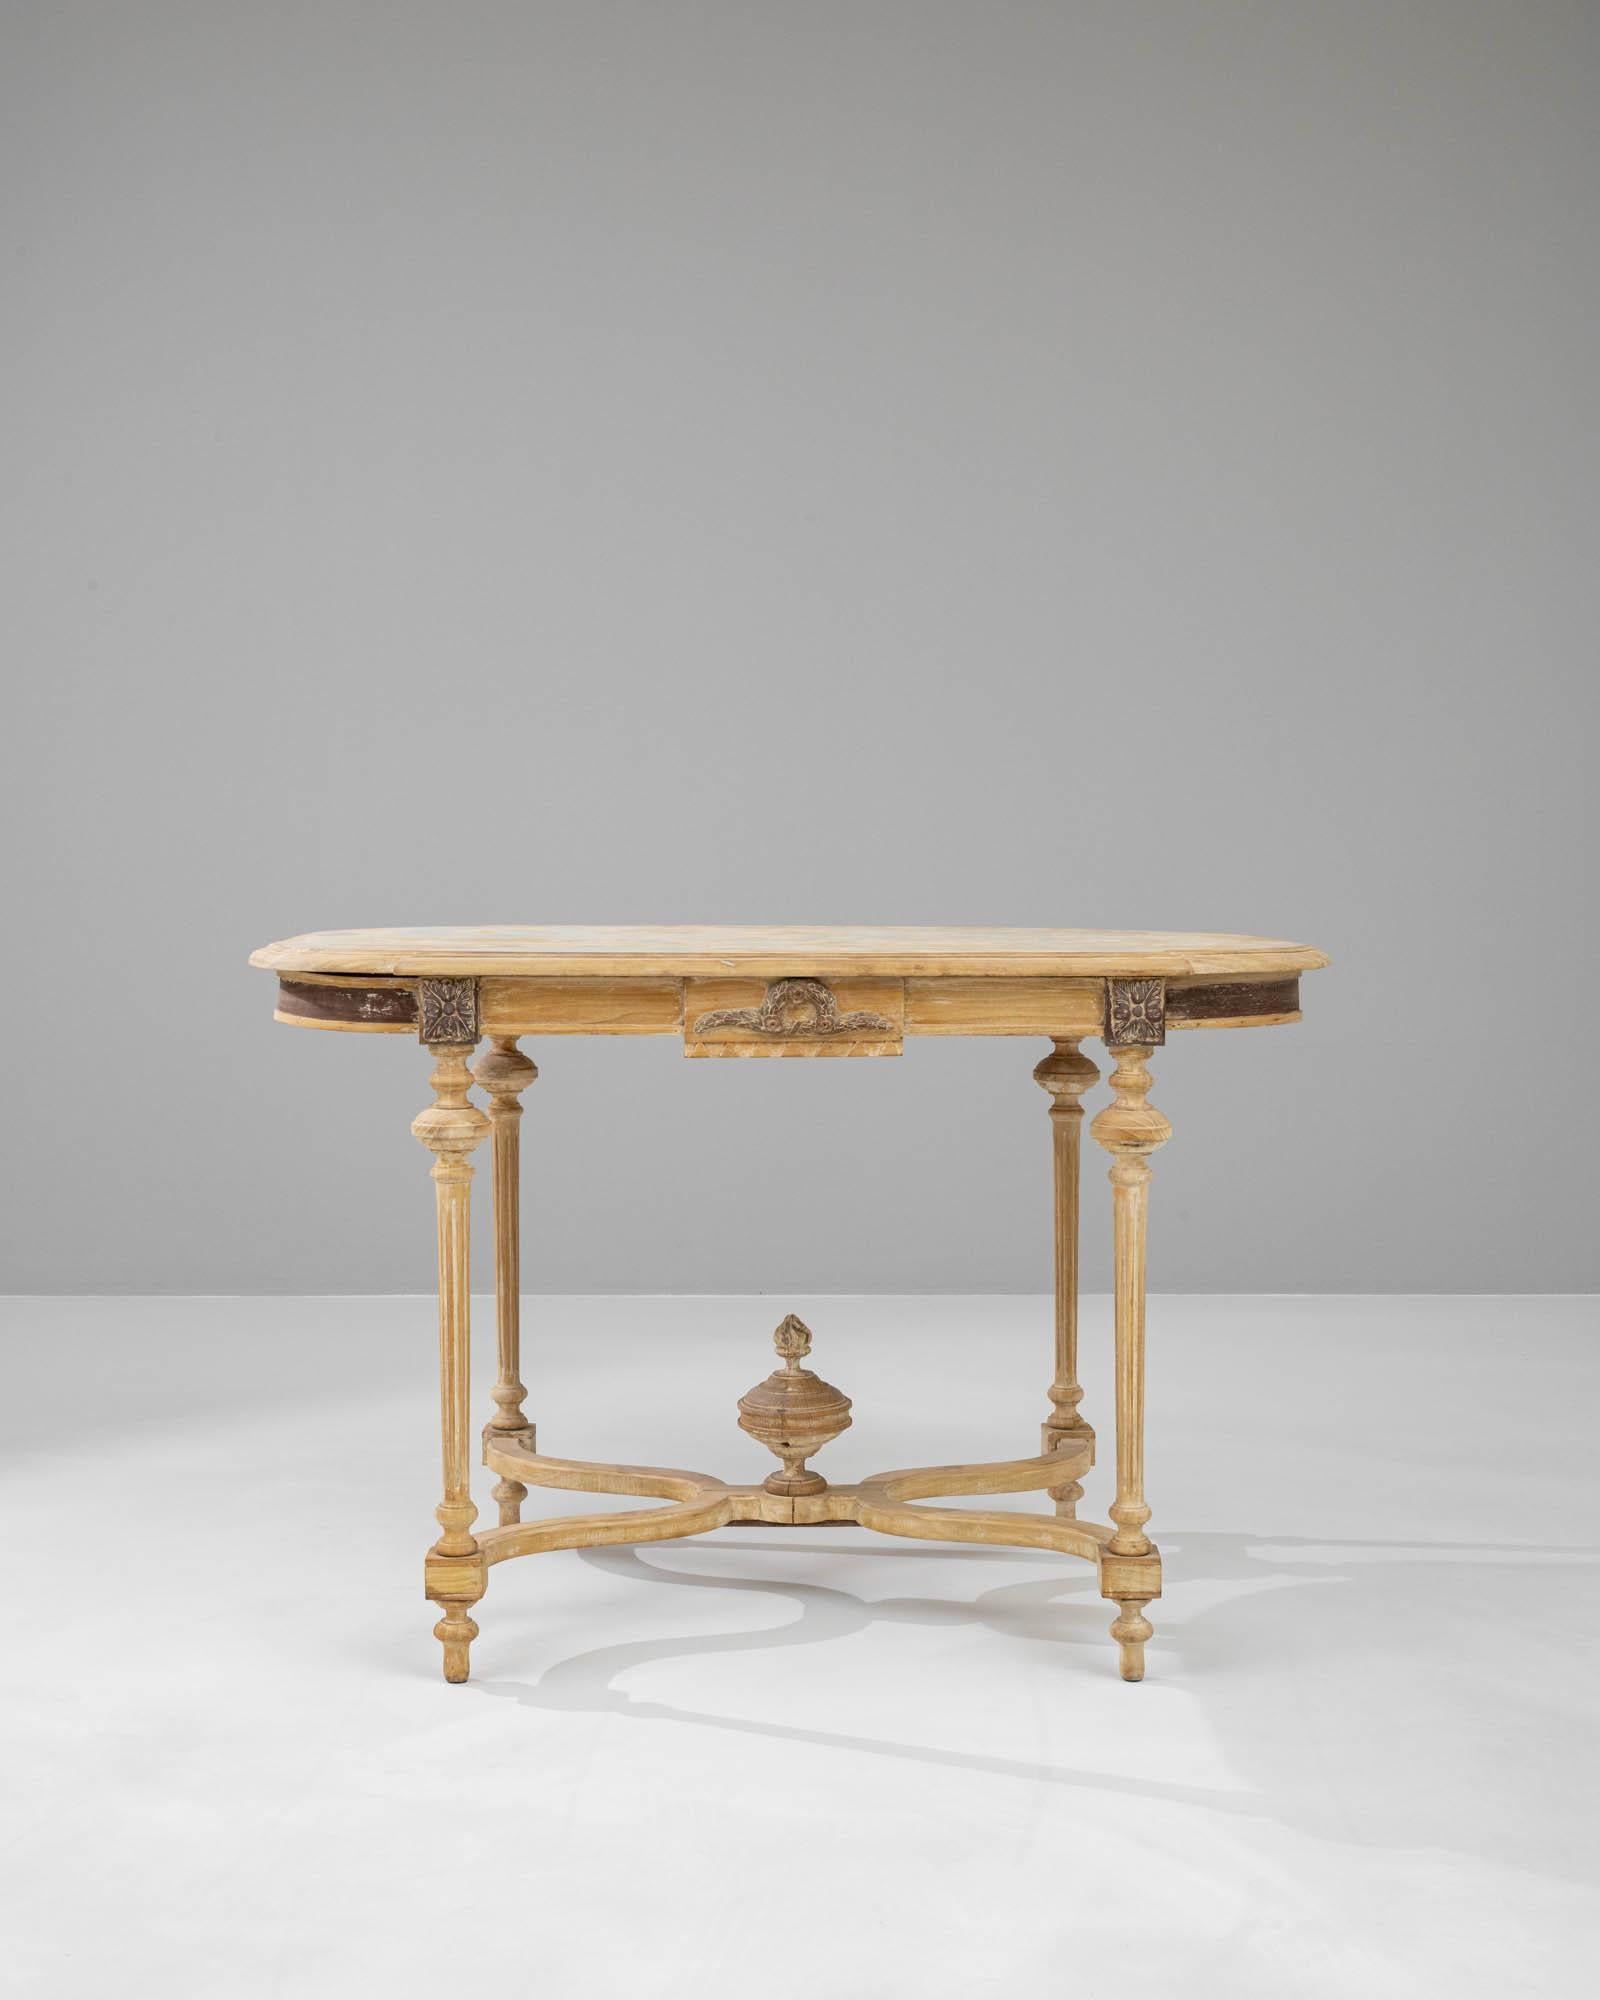 Elevate your home with a touch of timeless elegance with this exquisite 19th-century French wooden table. Crafted during a period renowned for its refined aesthetics, this table features a beautifully weathered surface and ornate carvings that